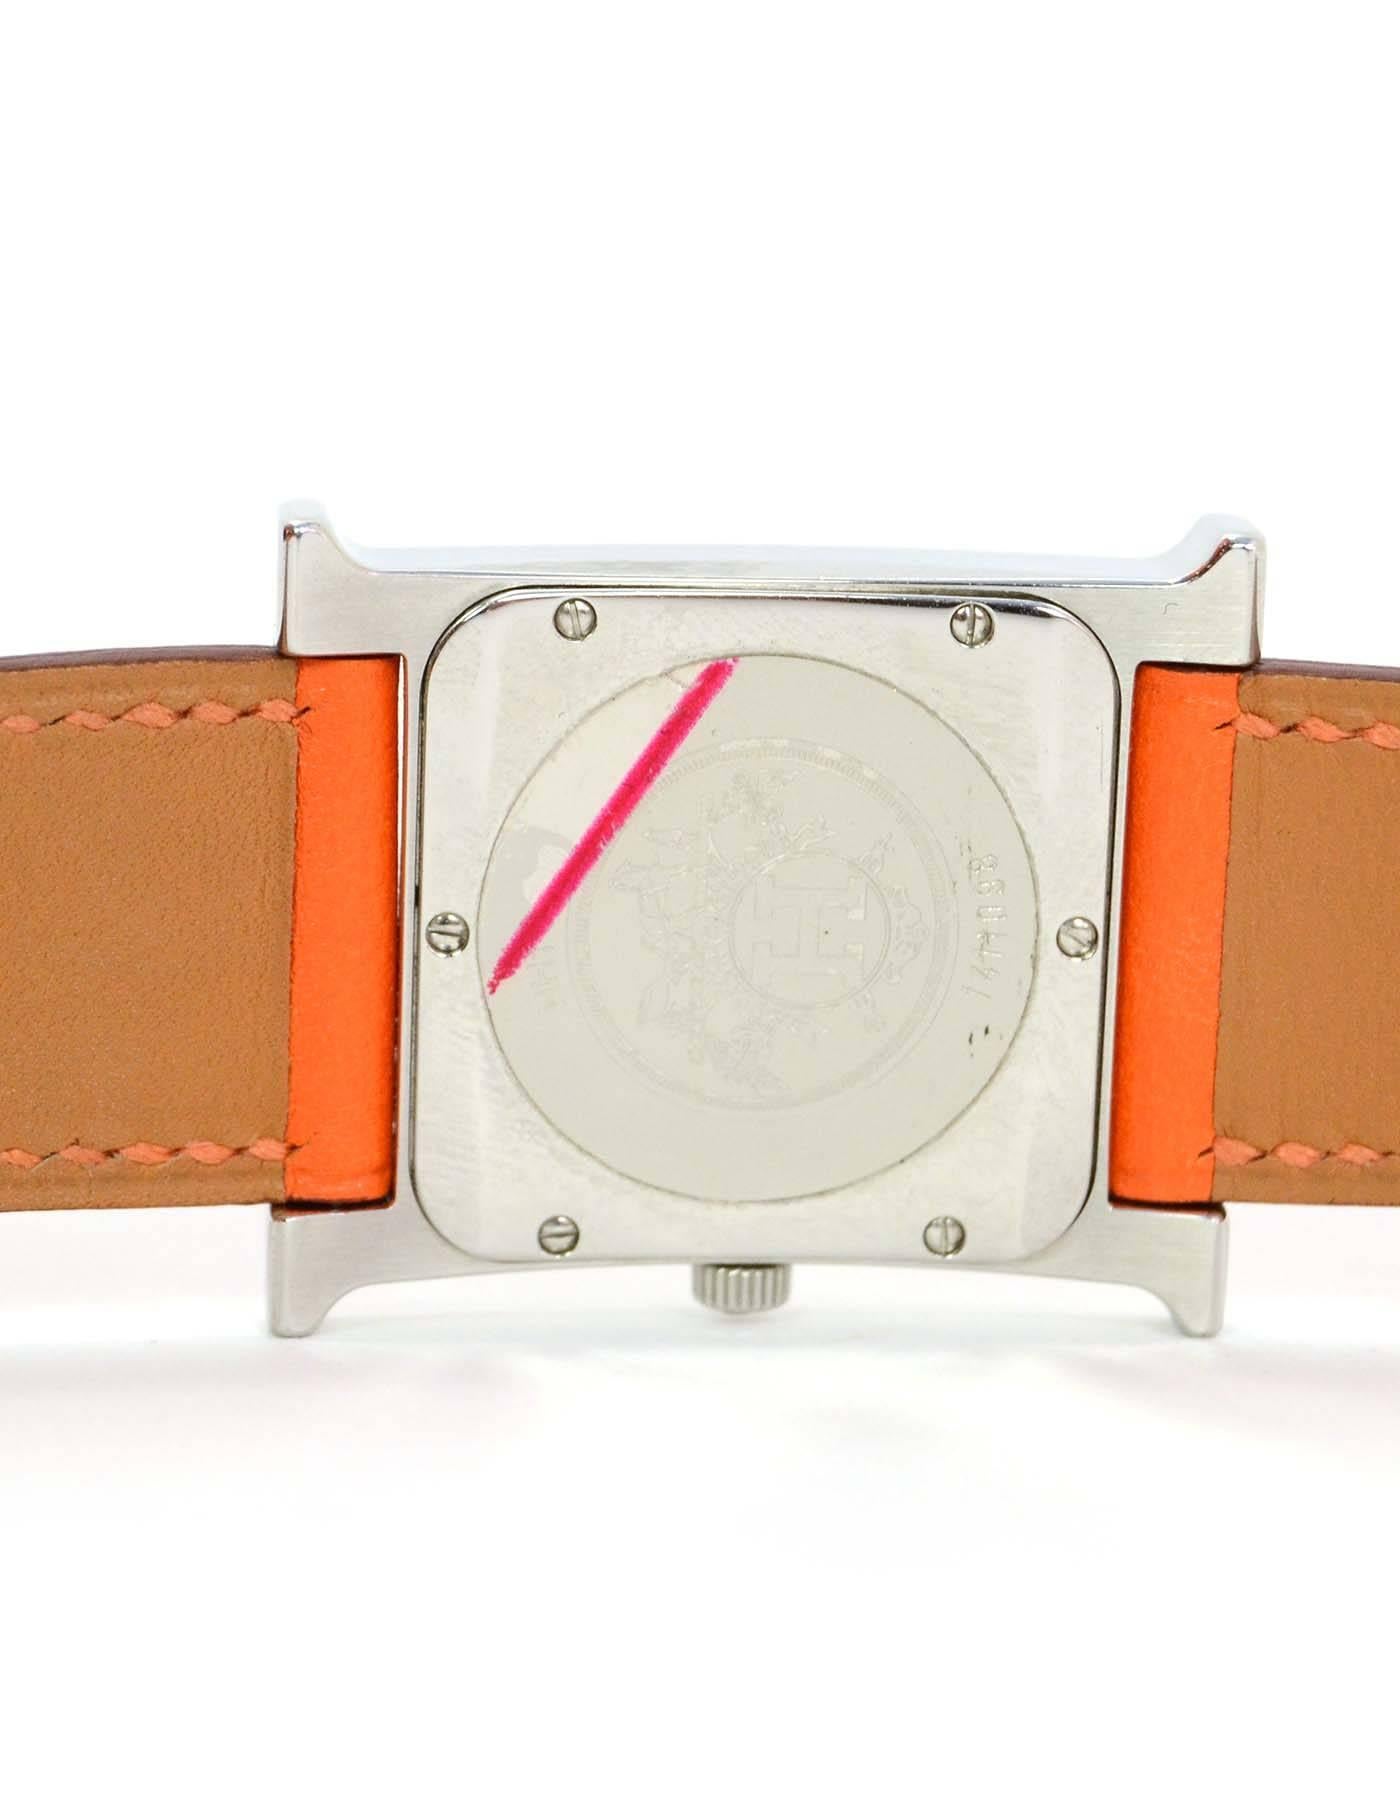 Hermes Orange Leather and Stainless H Heure Hour MM Watch rt. $2, 725 1